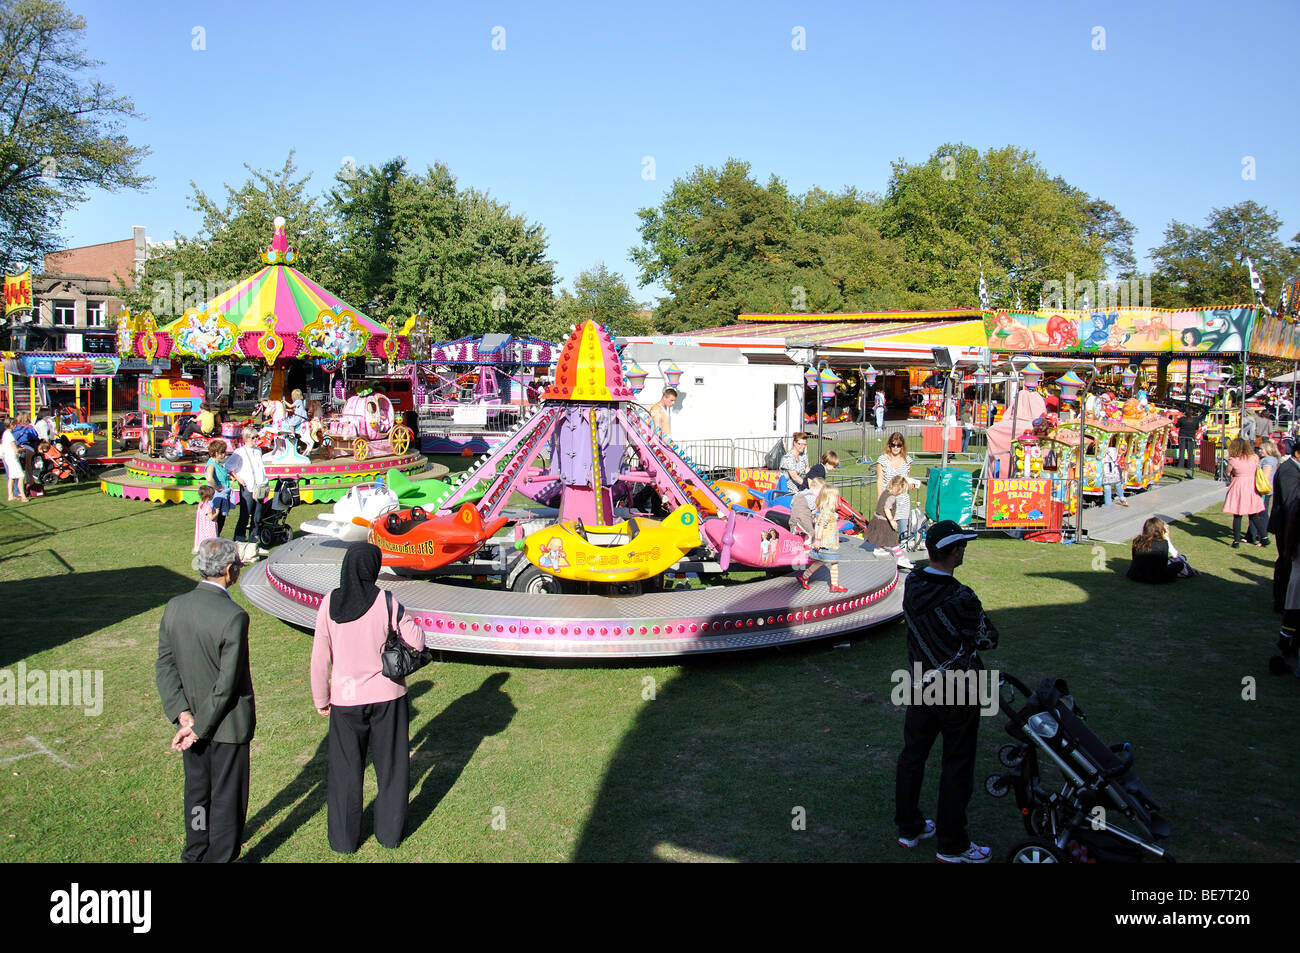 Fête foraine sur vert, Chiswick High Road, Chiswick, London Borough of London, Greater London, Angleterre, Royaume-Uni Banque D'Images